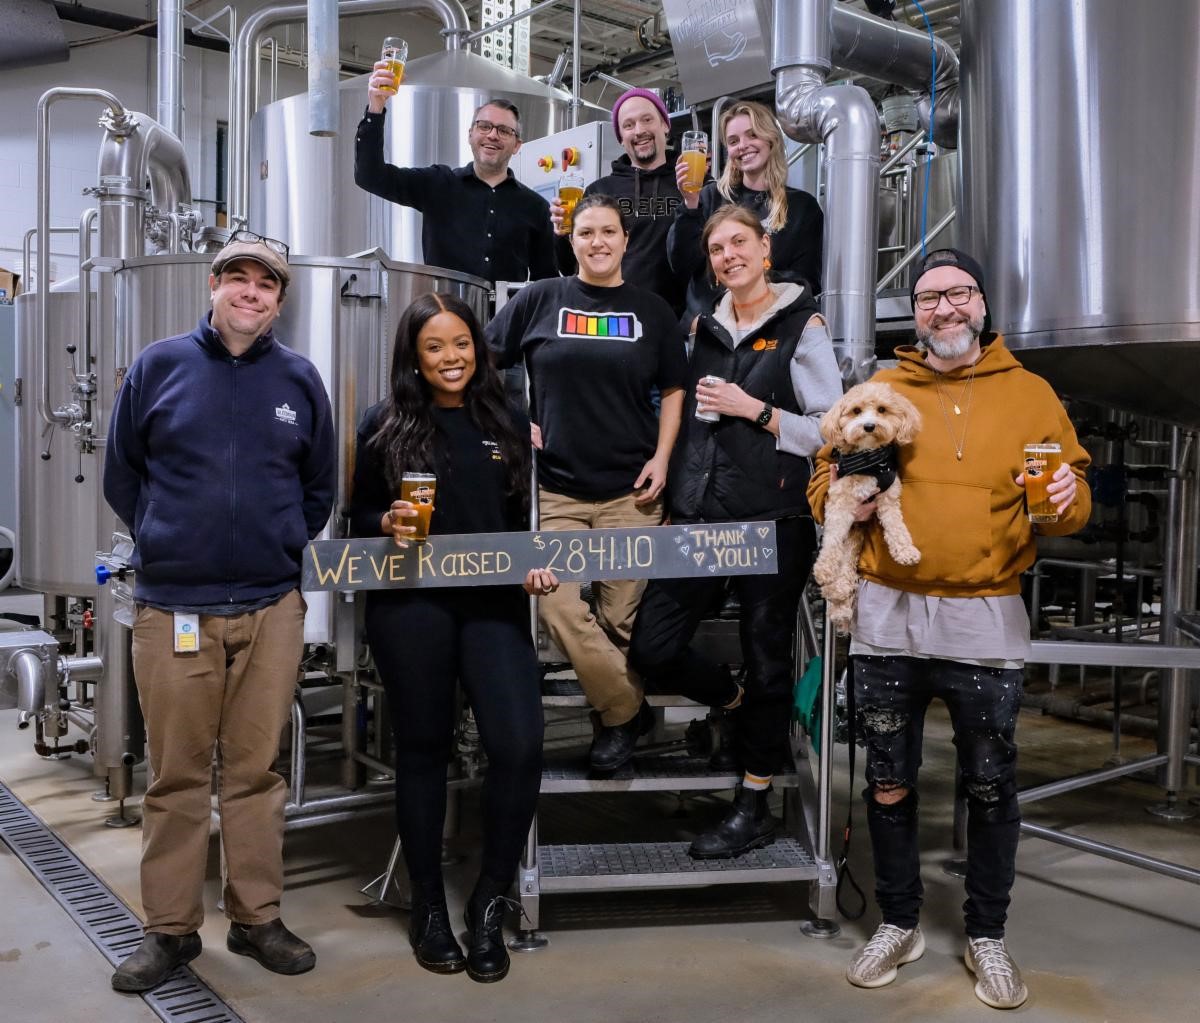 The funds will go towards helping students of colour obtain certifications in the brewing industry. Guelph.Beer consists of Wellington Brewery and Sleeman among other businesses.